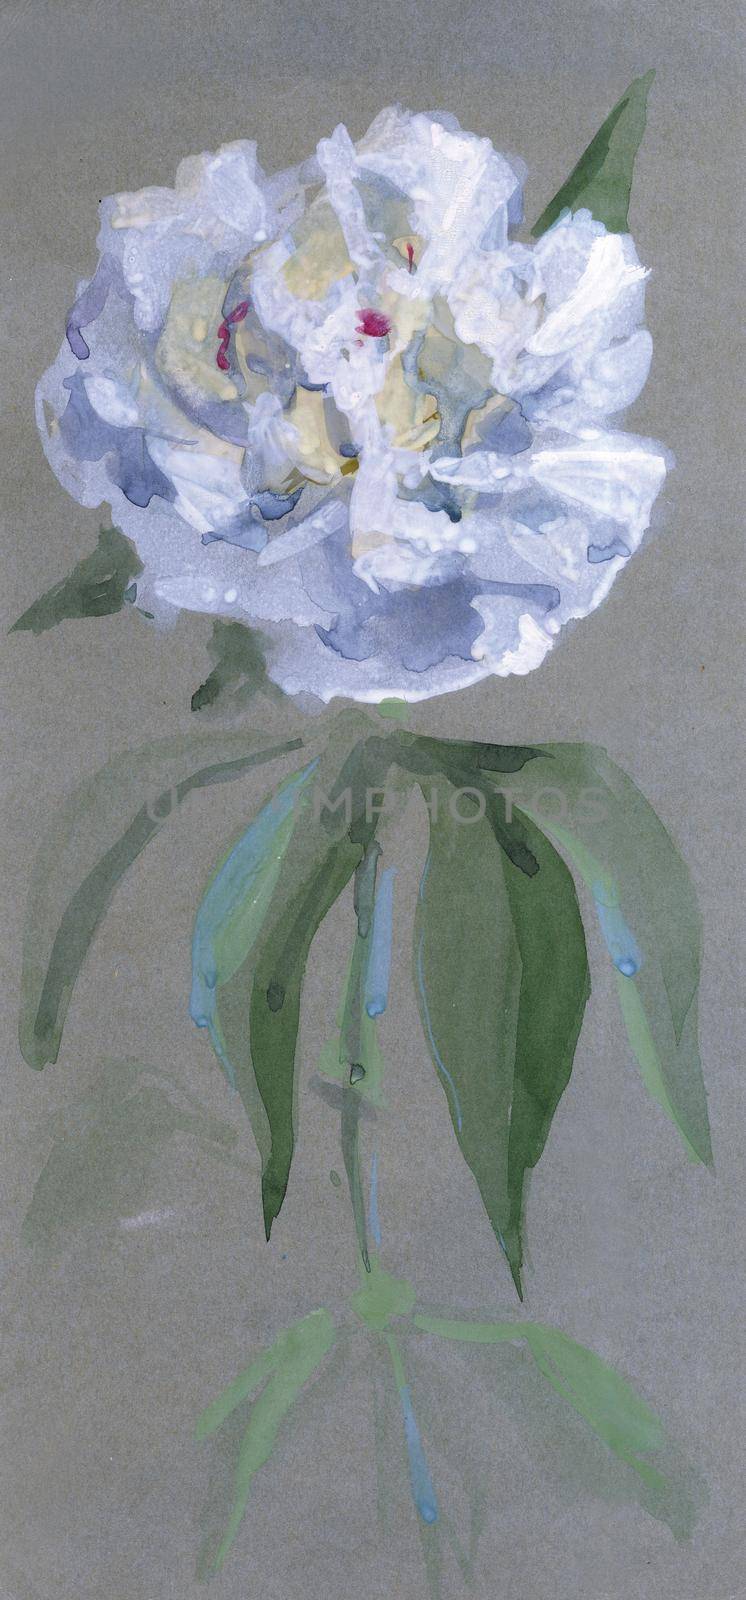 A luxurious white peony on a thin stem with leaves on bluish-gray paper